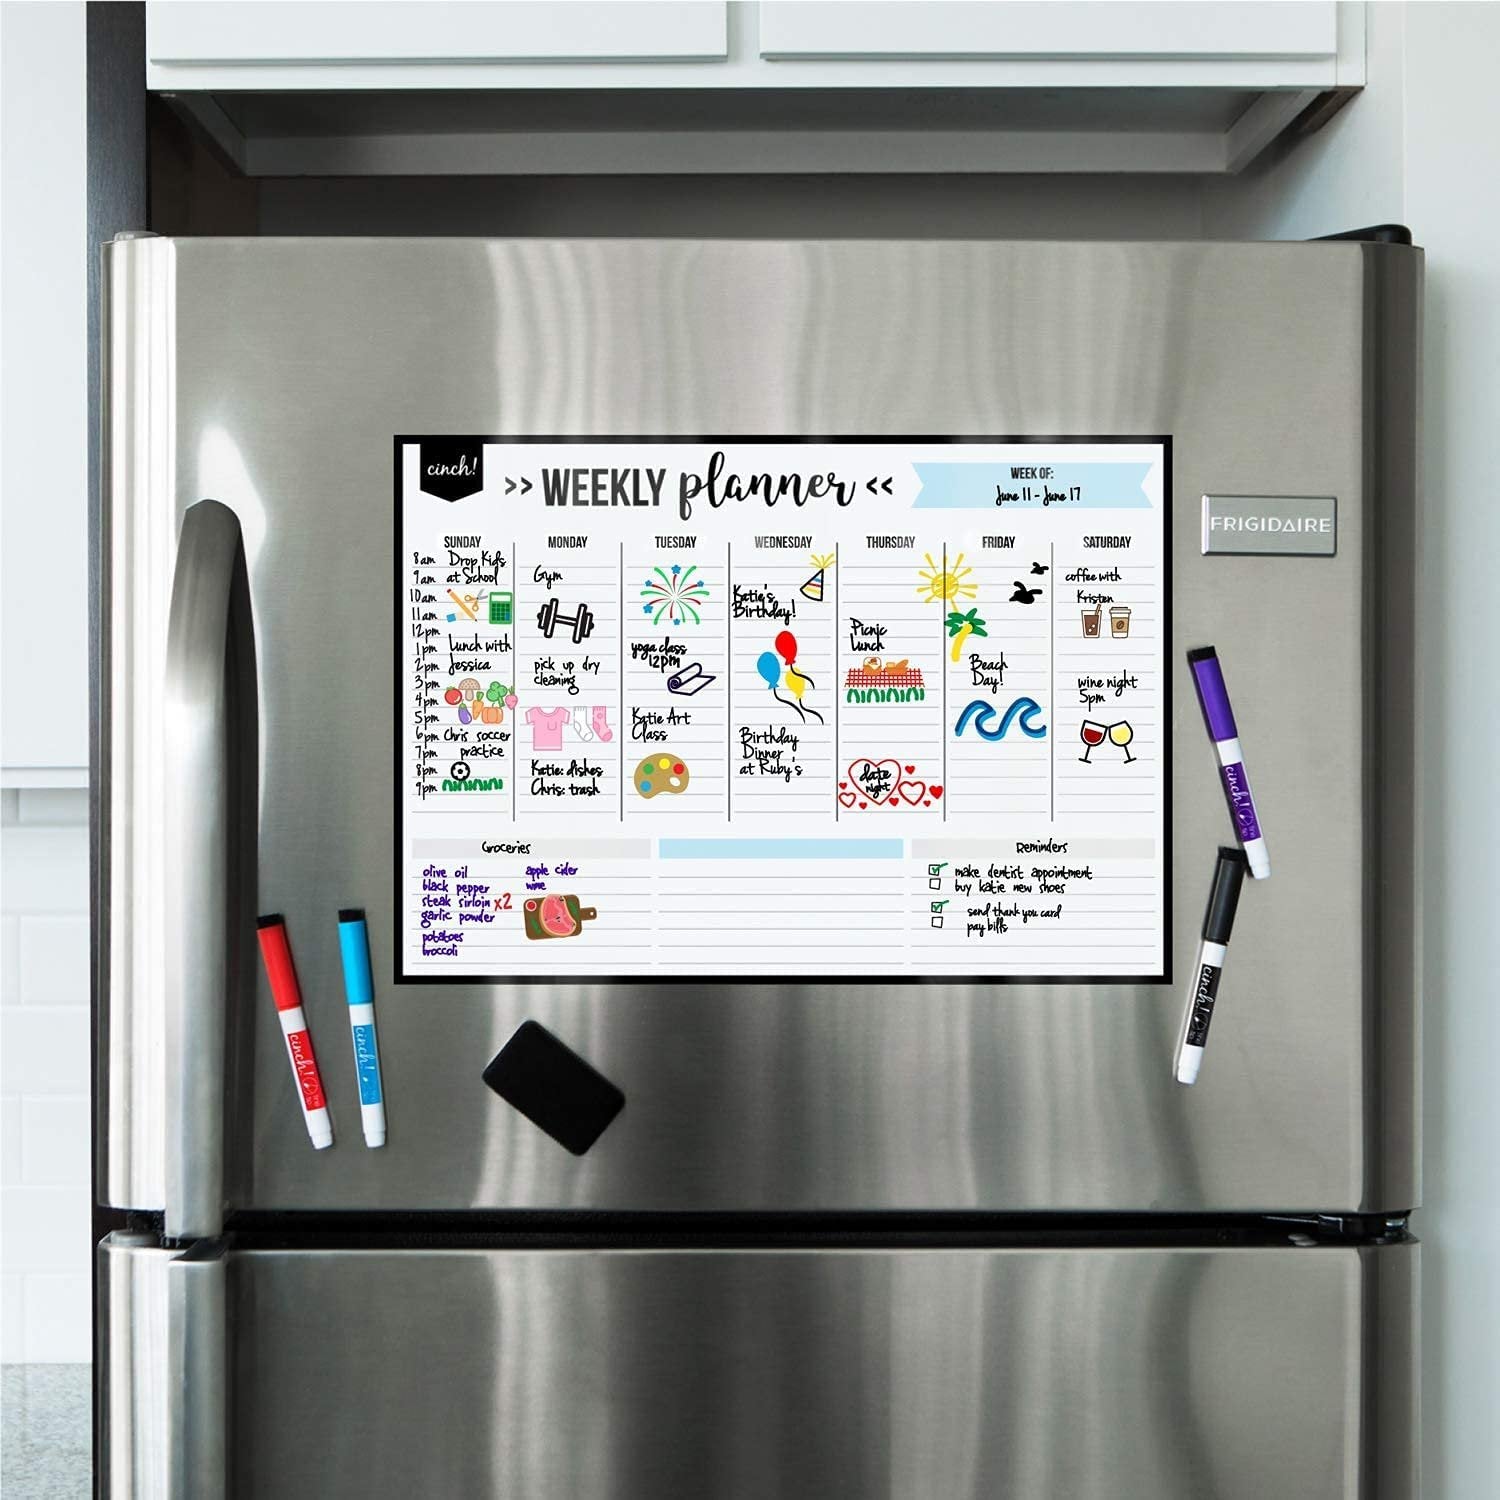 Magnetic Dry Erase Weekly Planner Calendar for Fridge: Stain Resistant Technology - 19x13" - 4 Fine Tip Markers and Large Eraser with Magnets - Whiteboard Organizer Planner: Refrigerator White Board